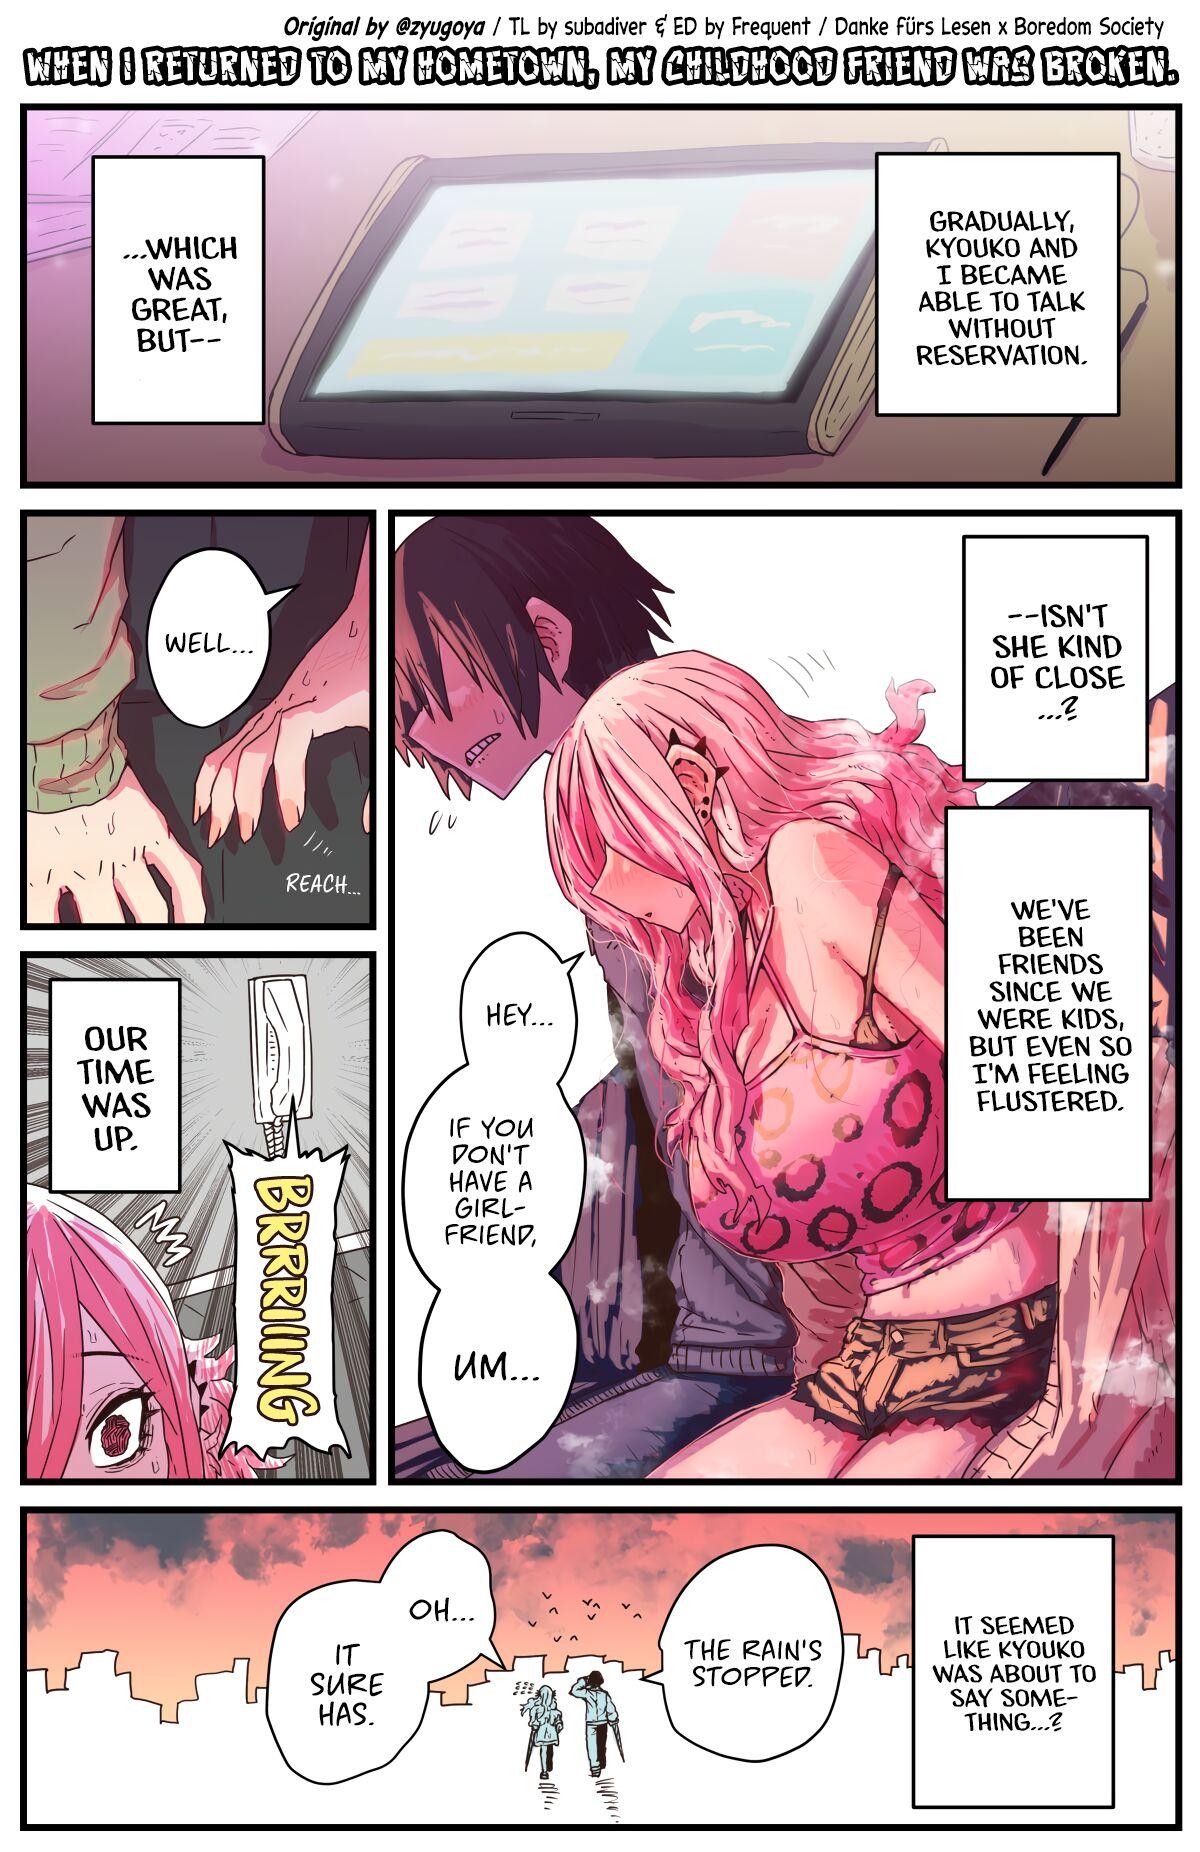 Clitoris When I Returned to My Hometown, My Childhood Friend was Broken - Original Long Hair - Page 8